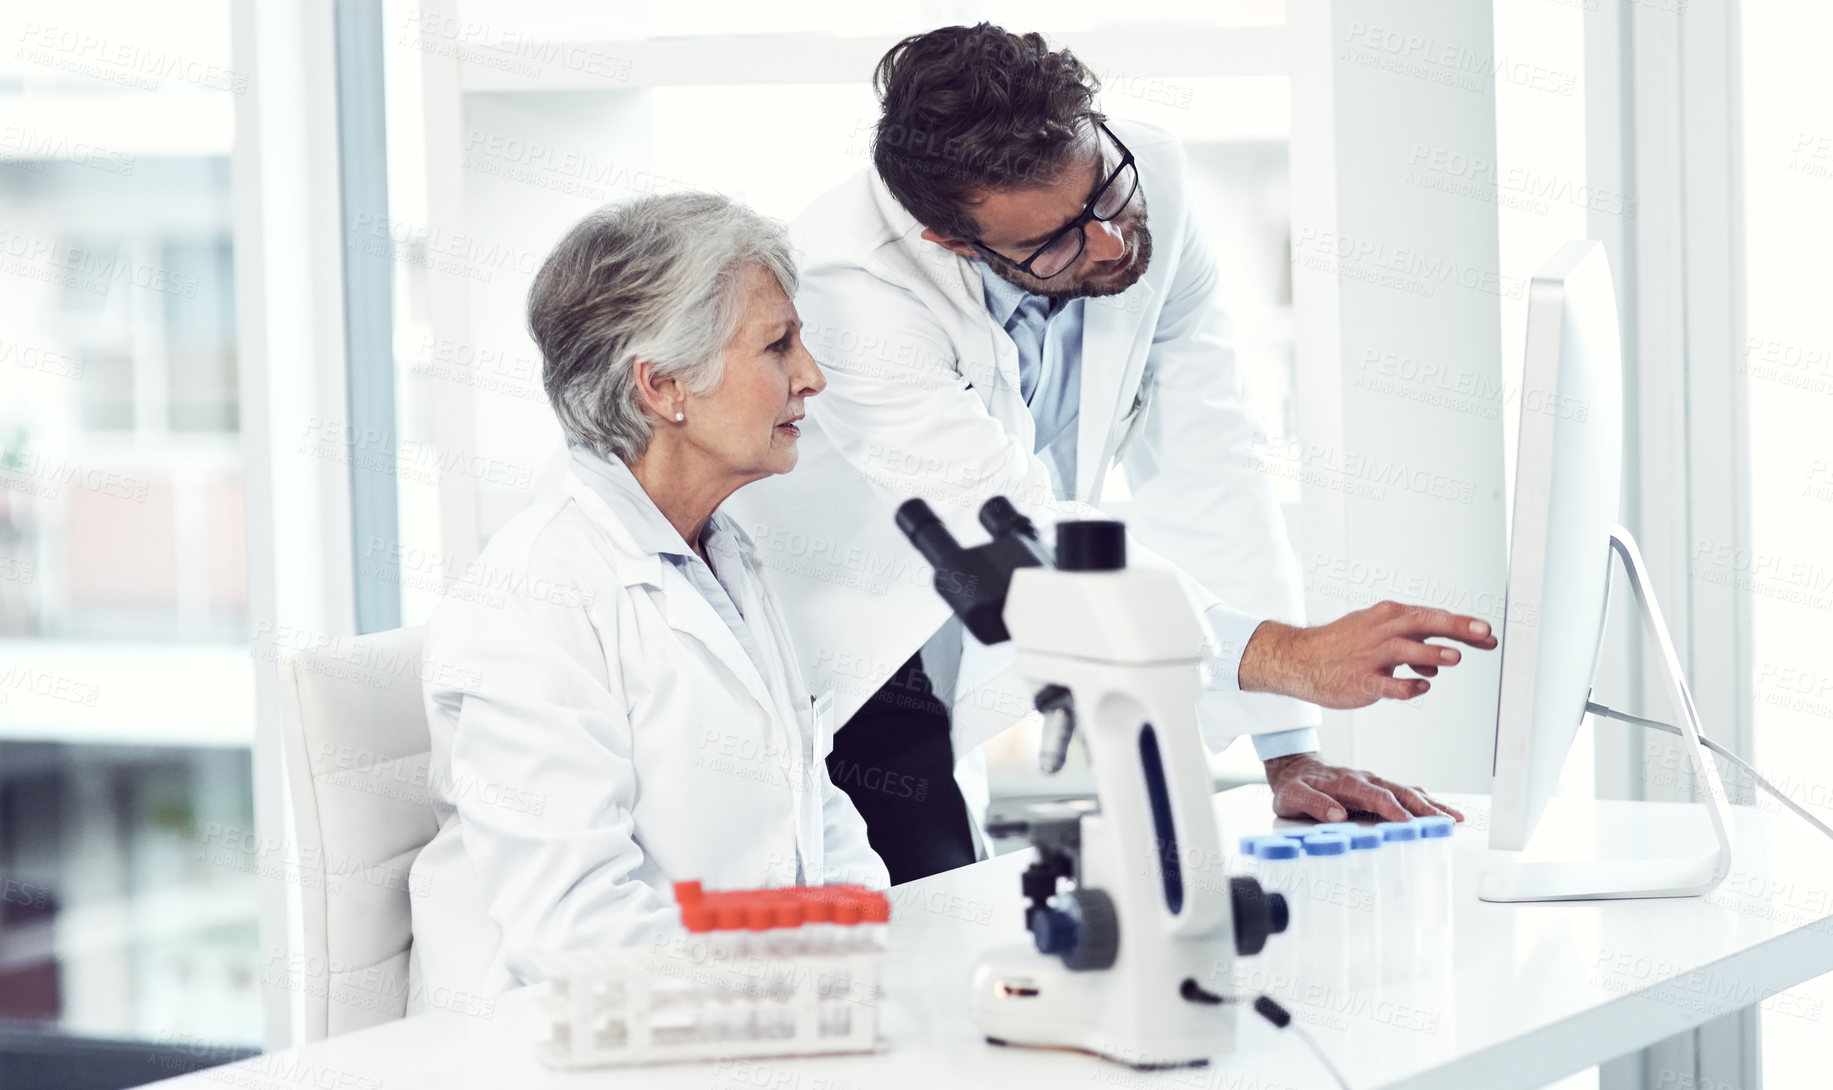 Buy stock photo Shot of two focused scientist working together on a computer inside of a laboratory